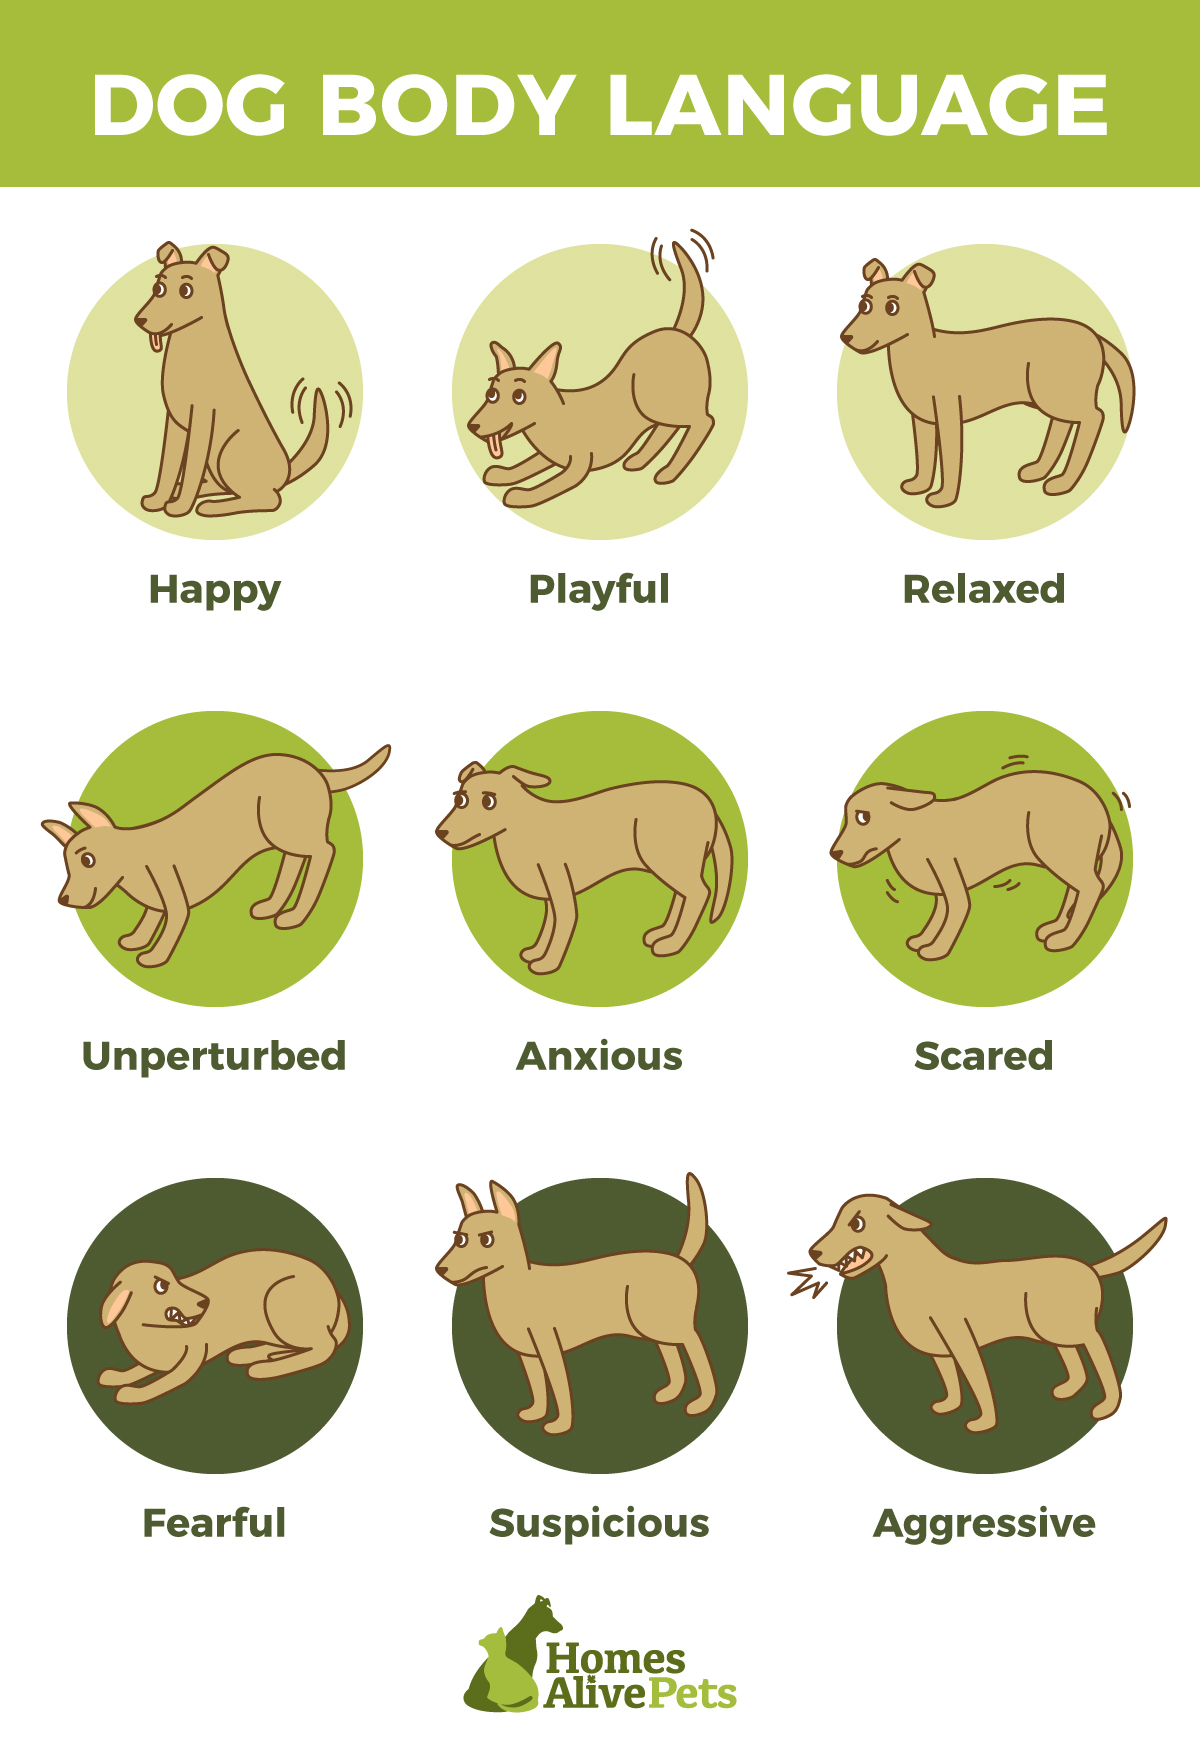 understand your dog better